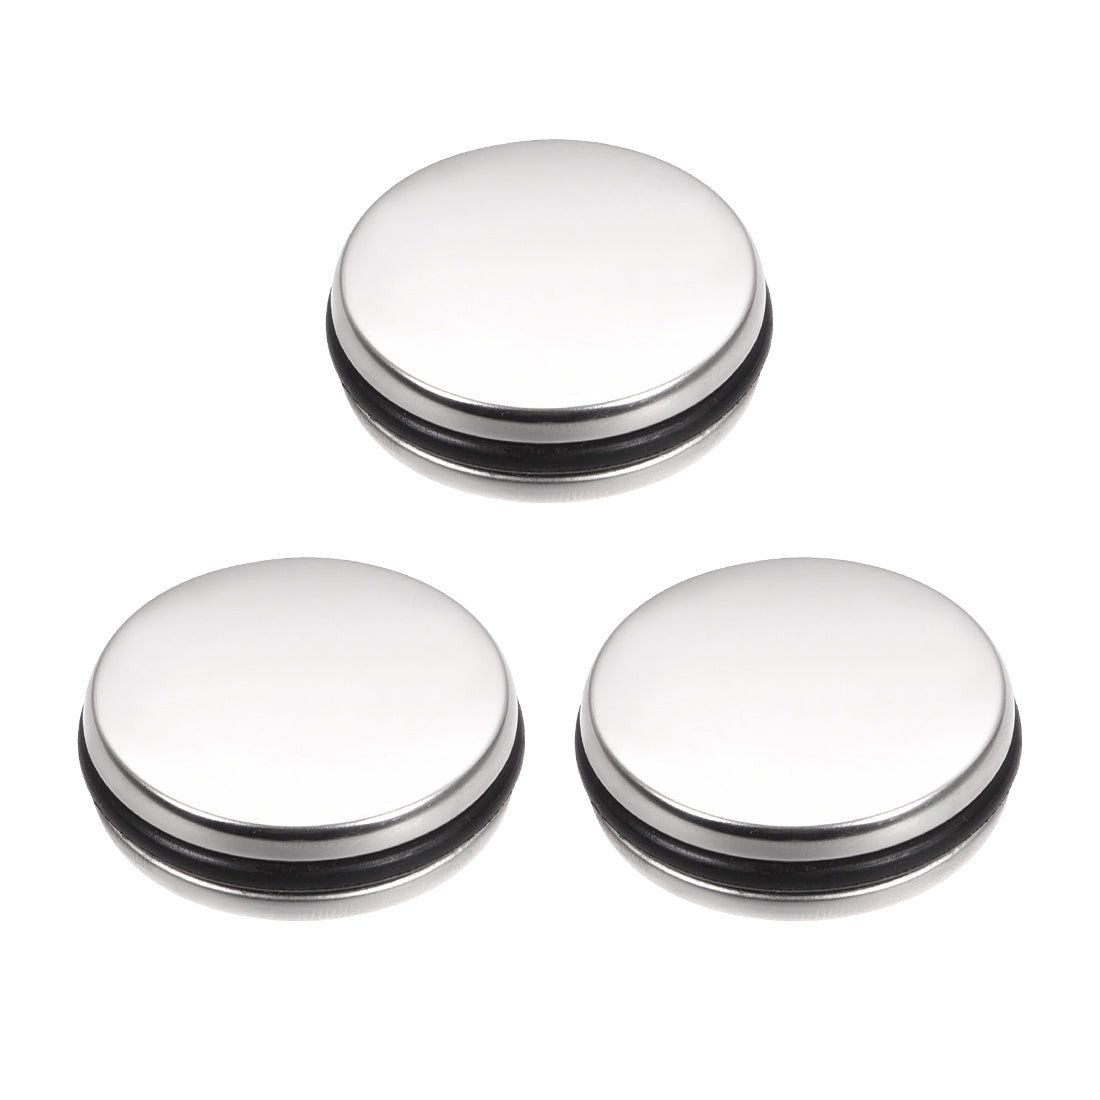 Uxcell Uxcell Basin Sink Plug Stopper Stainless Steel 35mm Diameter Drain Stopper